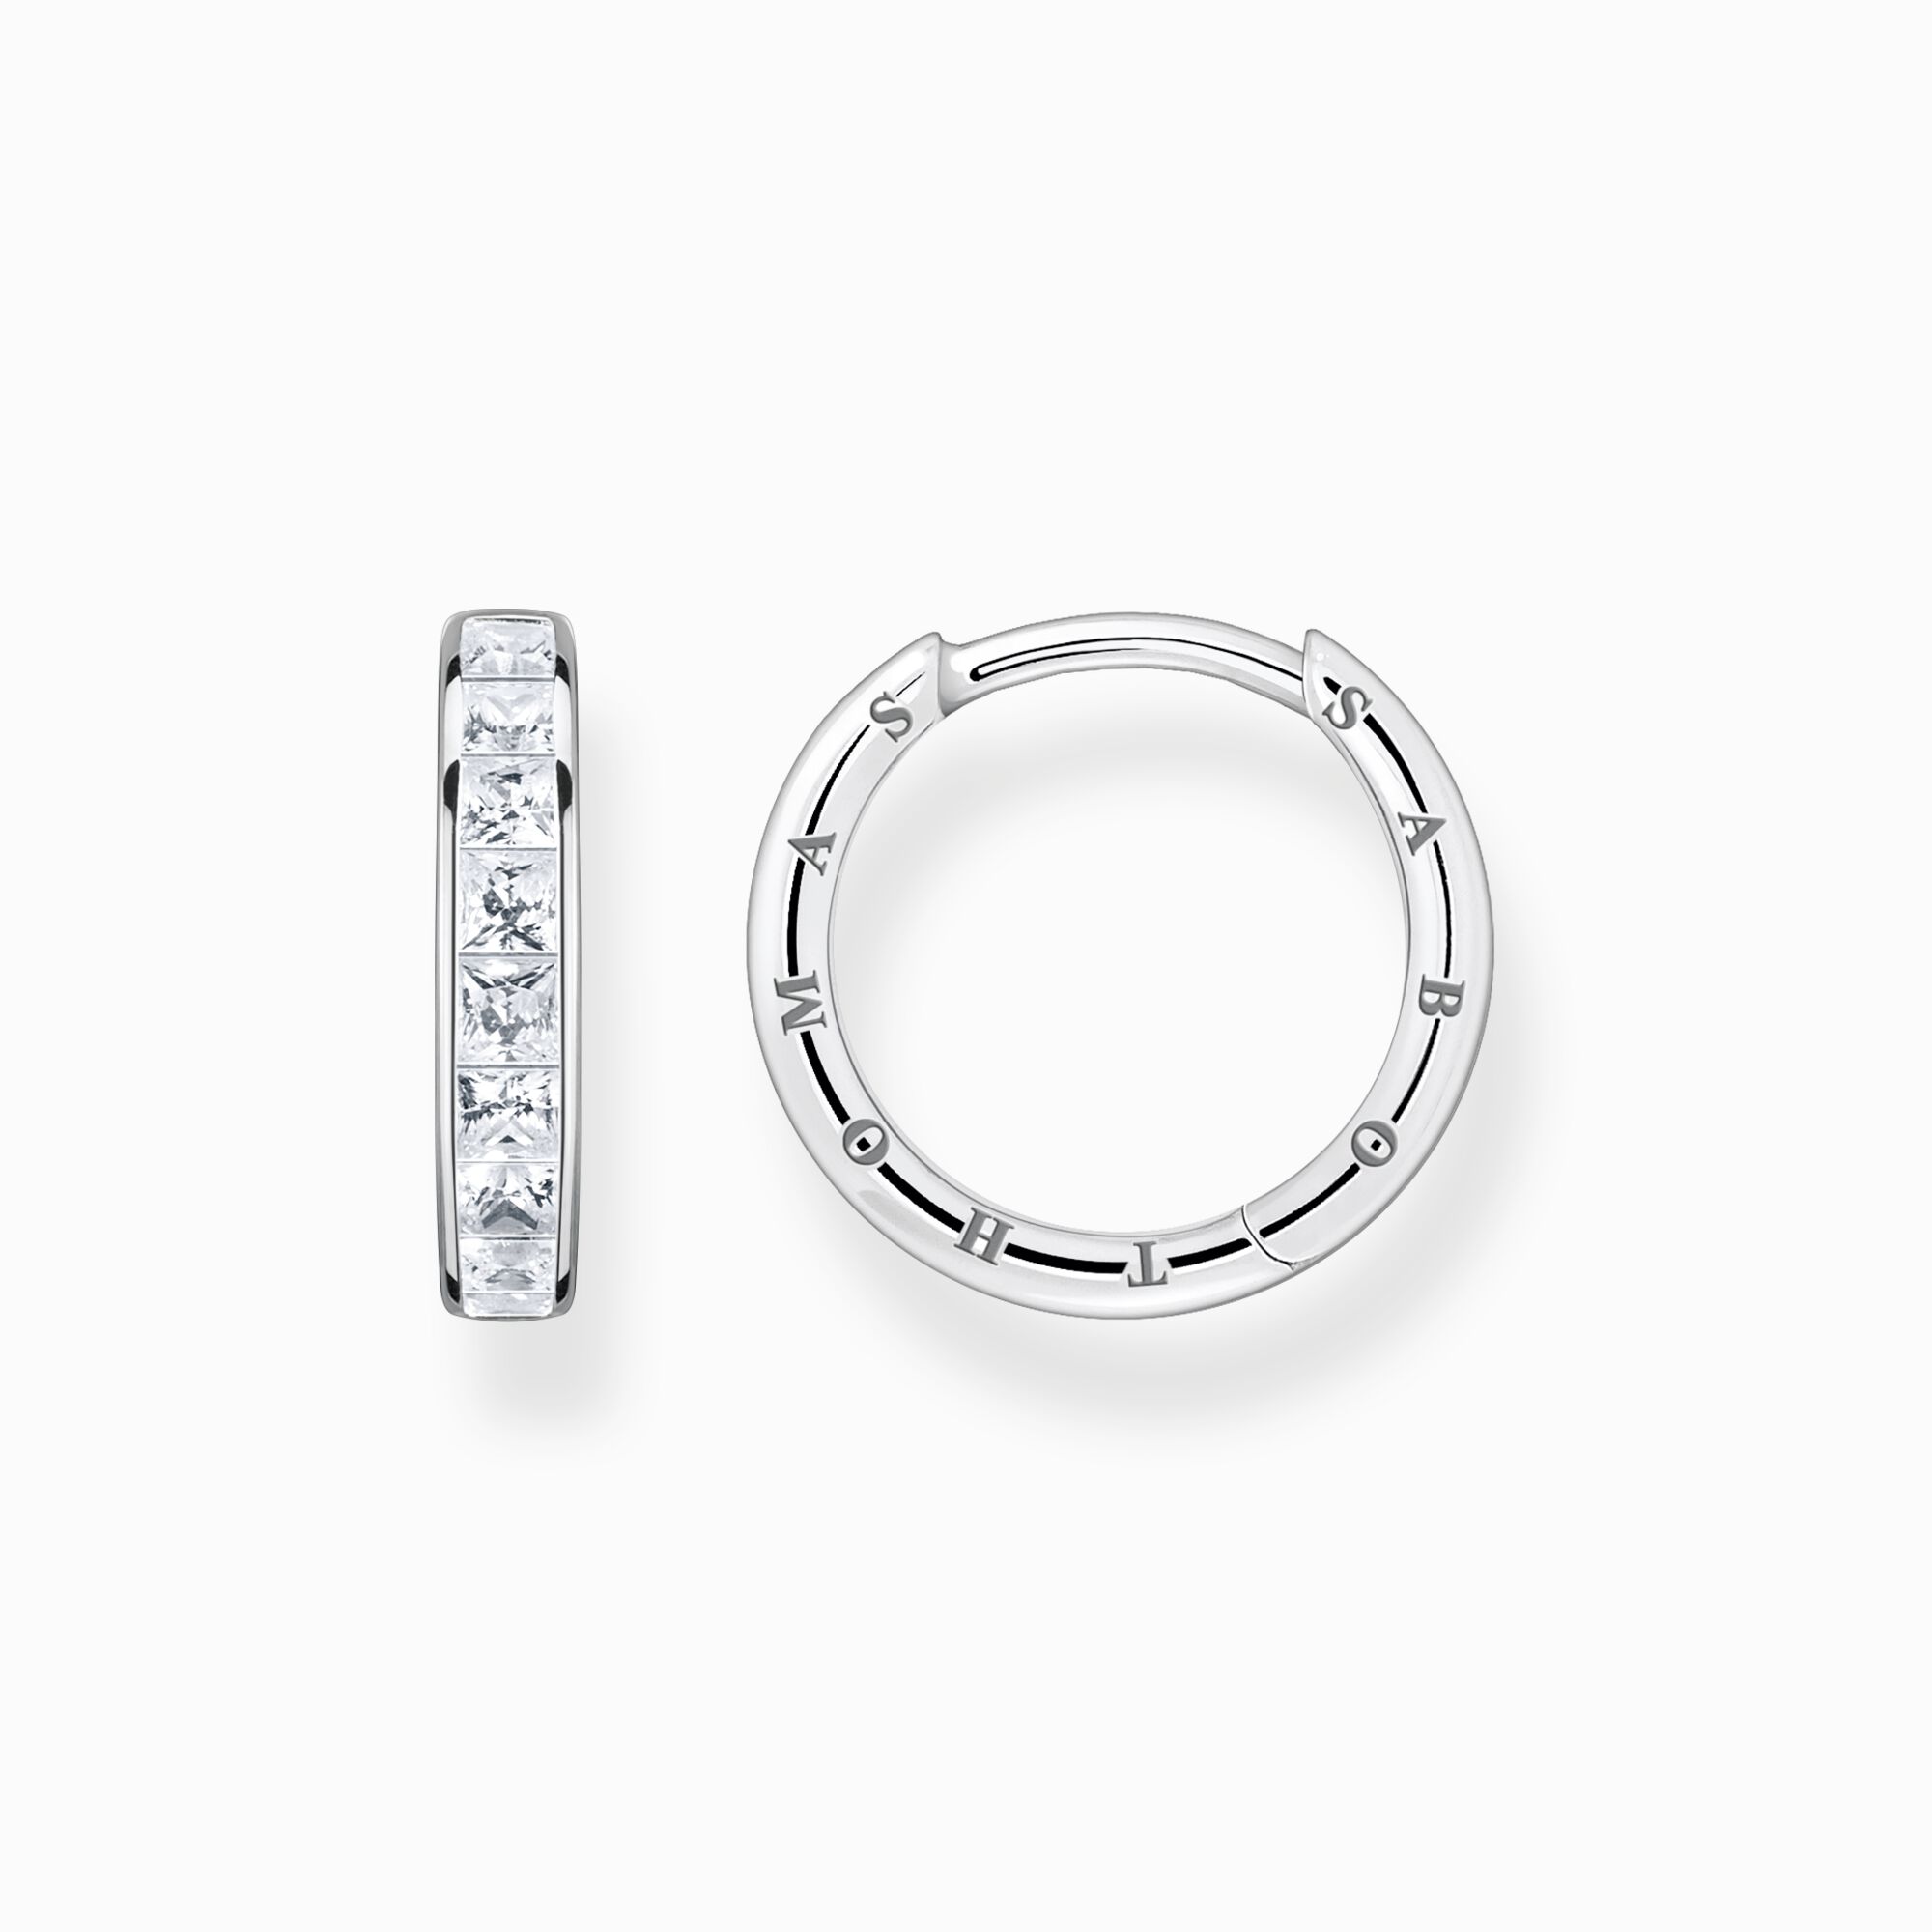 Hoop earrings white stones pav&eacute; silver from the  collection in the THOMAS SABO online store